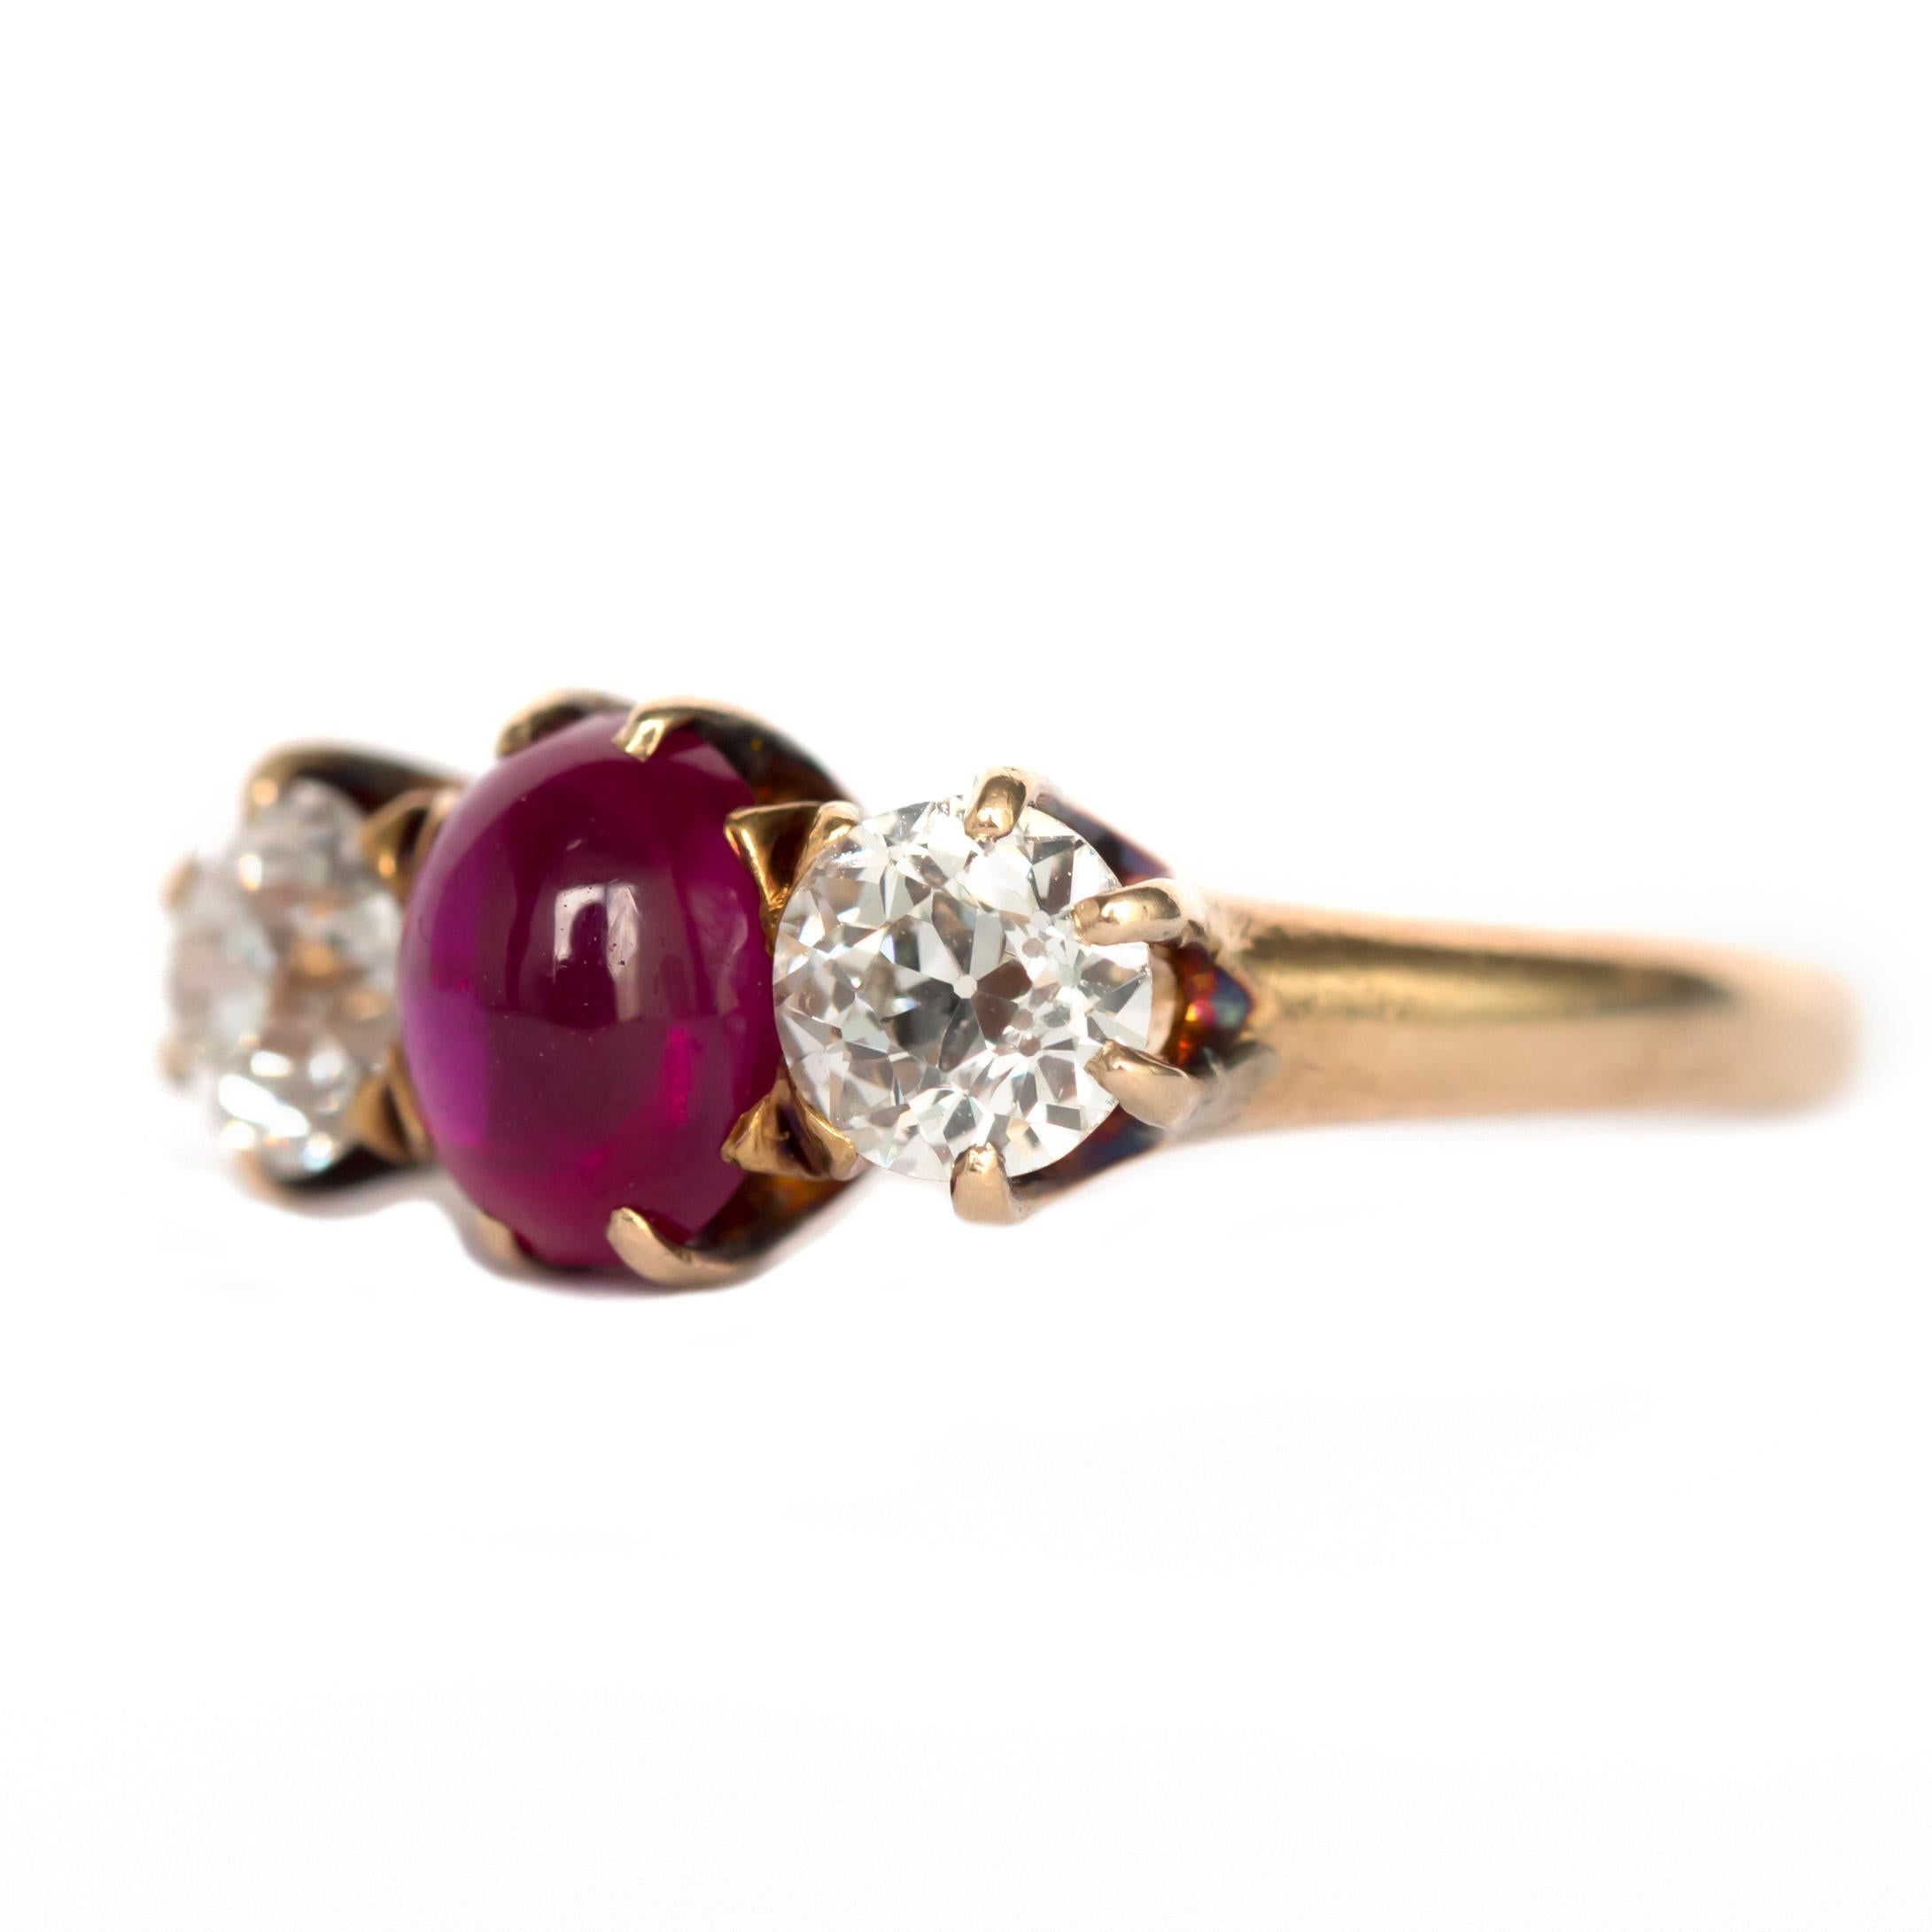 Ring Size: 6
Metal Type: 18 karat Yellow Gold 
Weight: 3.7 grams

Center Diamond Details
Type: Synthetic Ruby
Shape: Cabachon
Carat Weight: 1.00 carat

Side Stone Details: 
Shape: Old European Brilliant 
Total Carat Weight: 1.00 carat
Color: